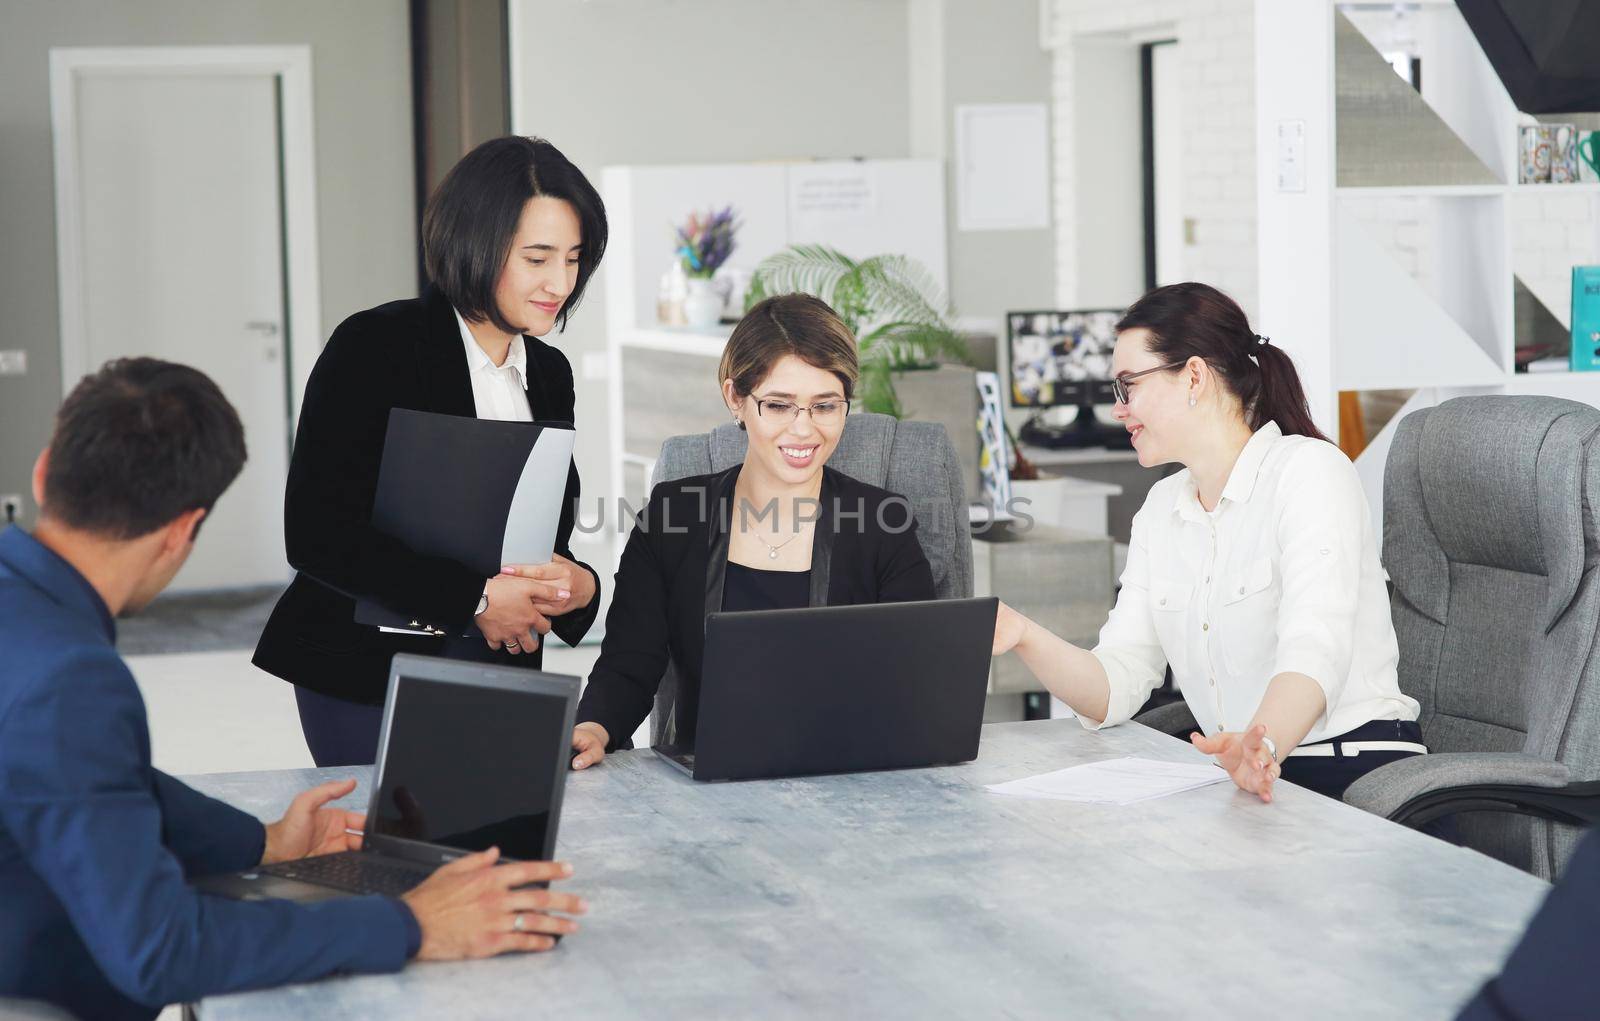 Three young successful business women in the office, together, happily working on a project by selinsmo